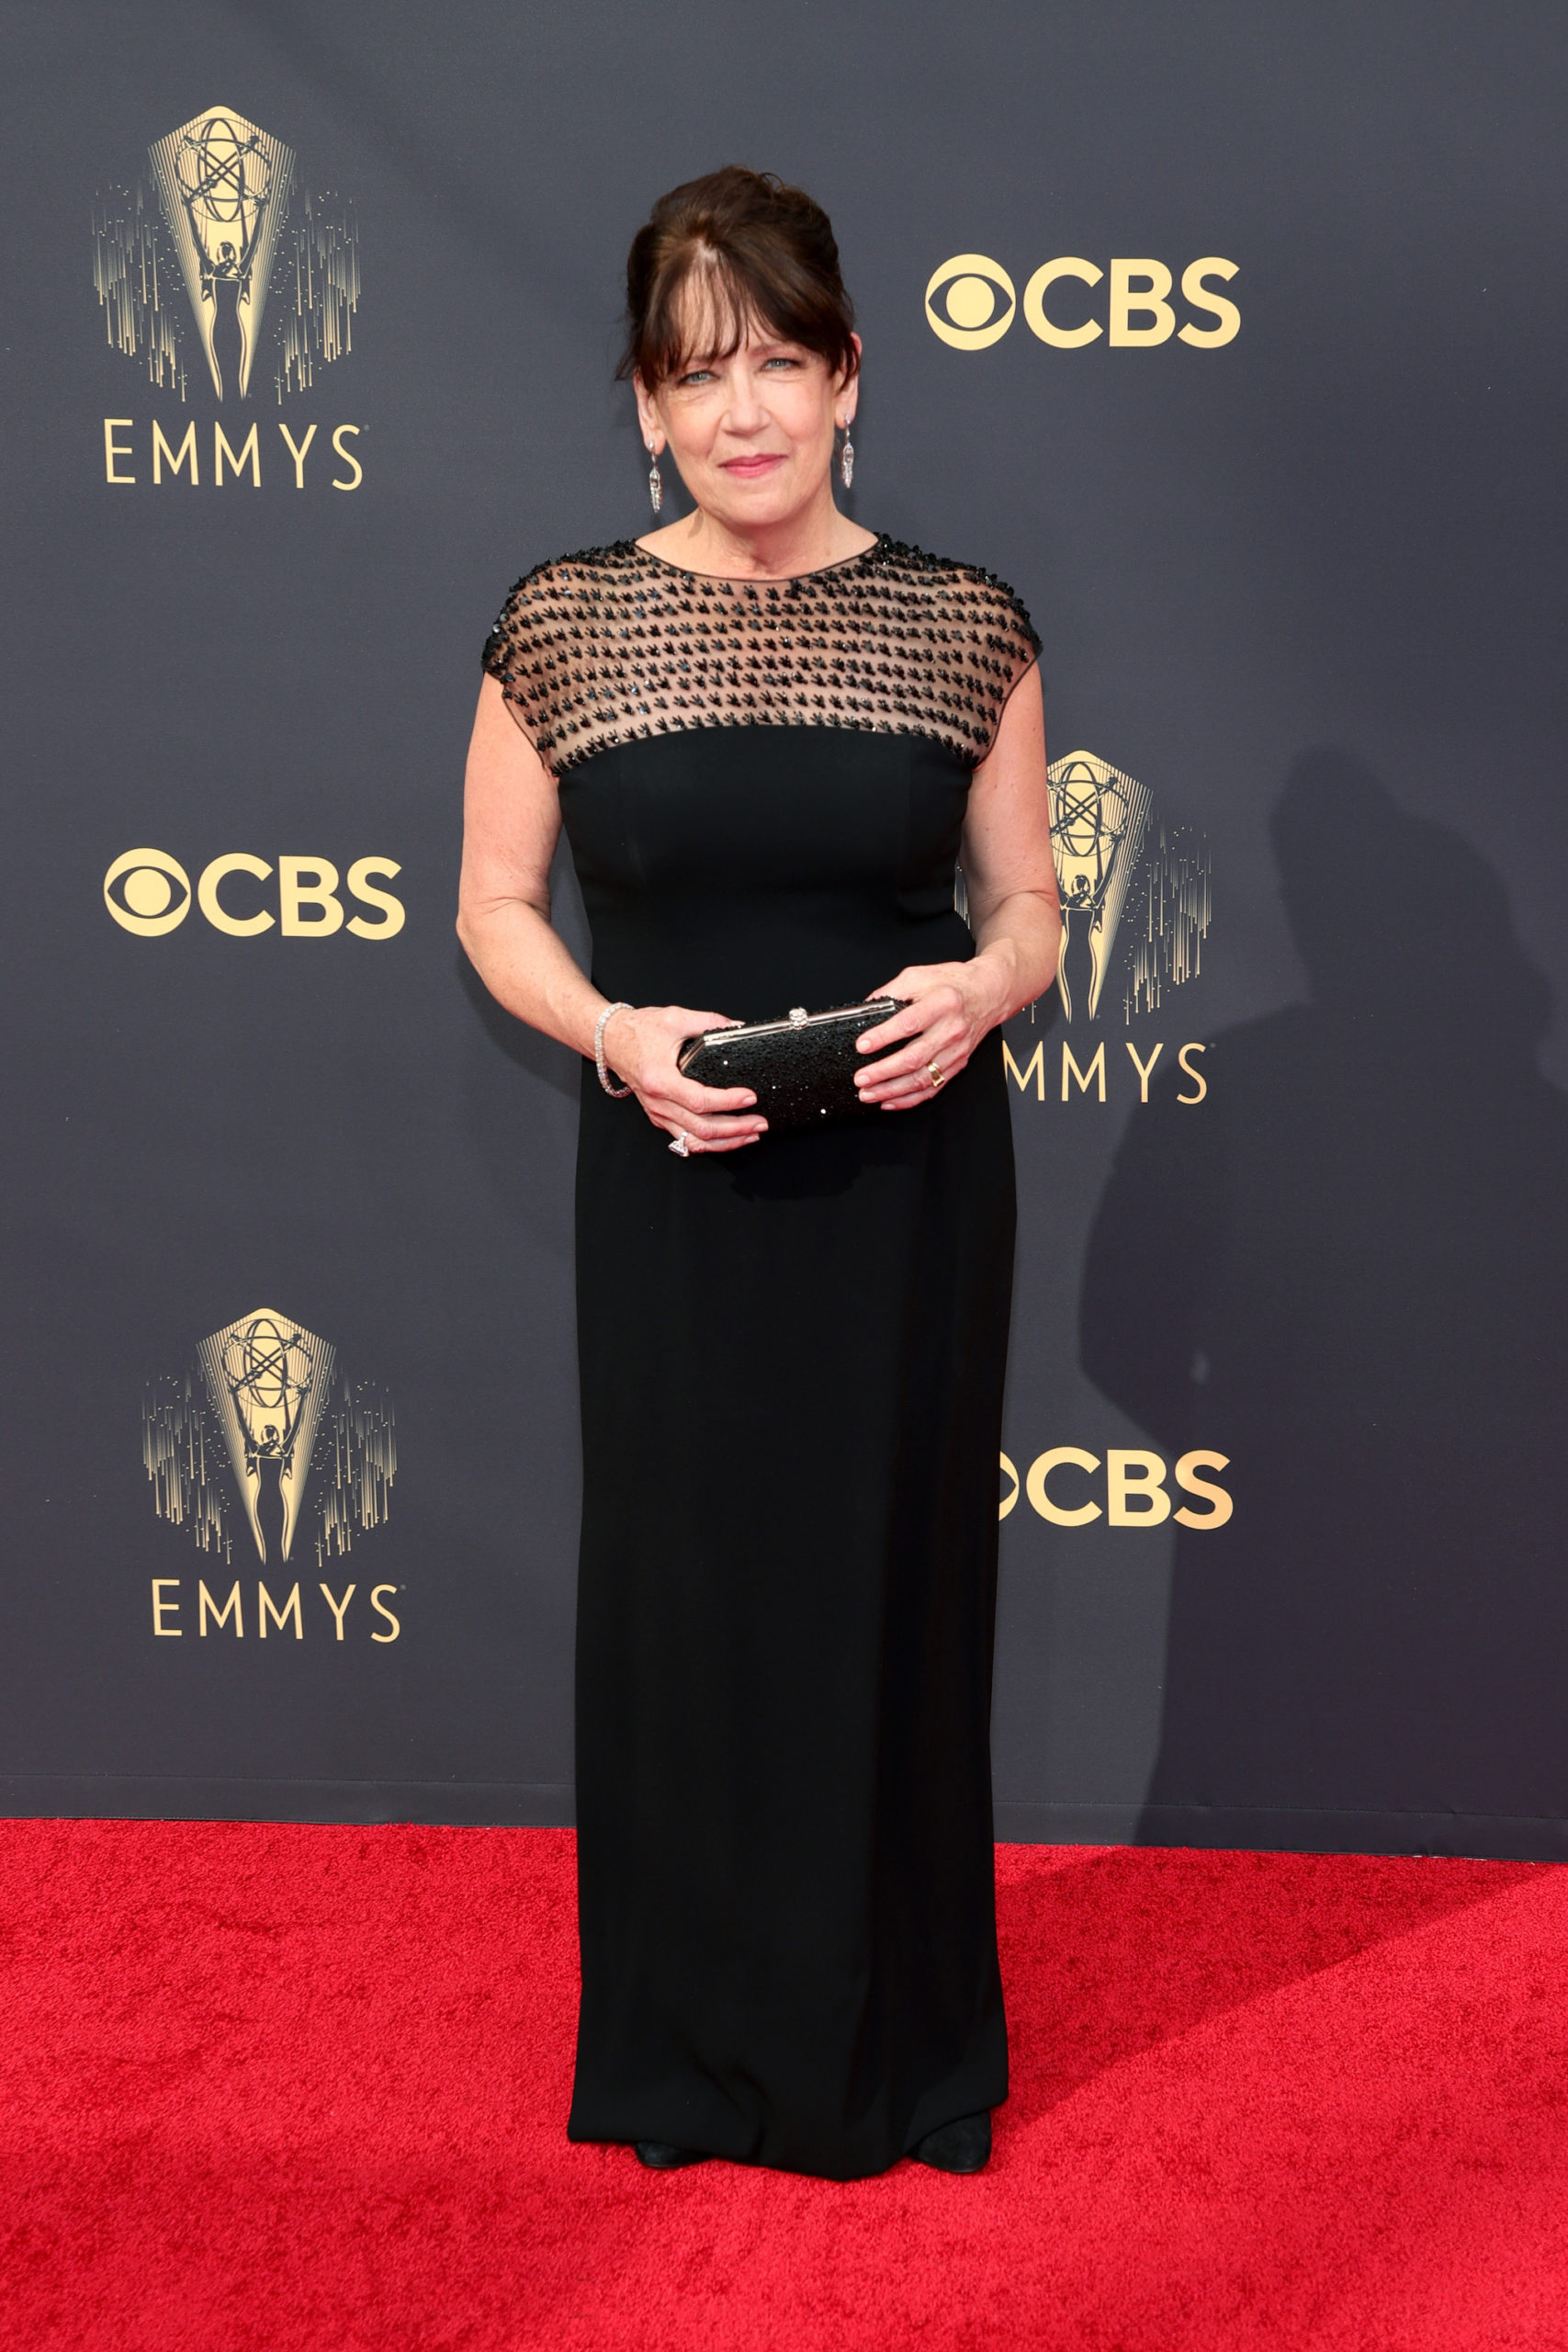 Ann Dowd at the 2021 Emmys